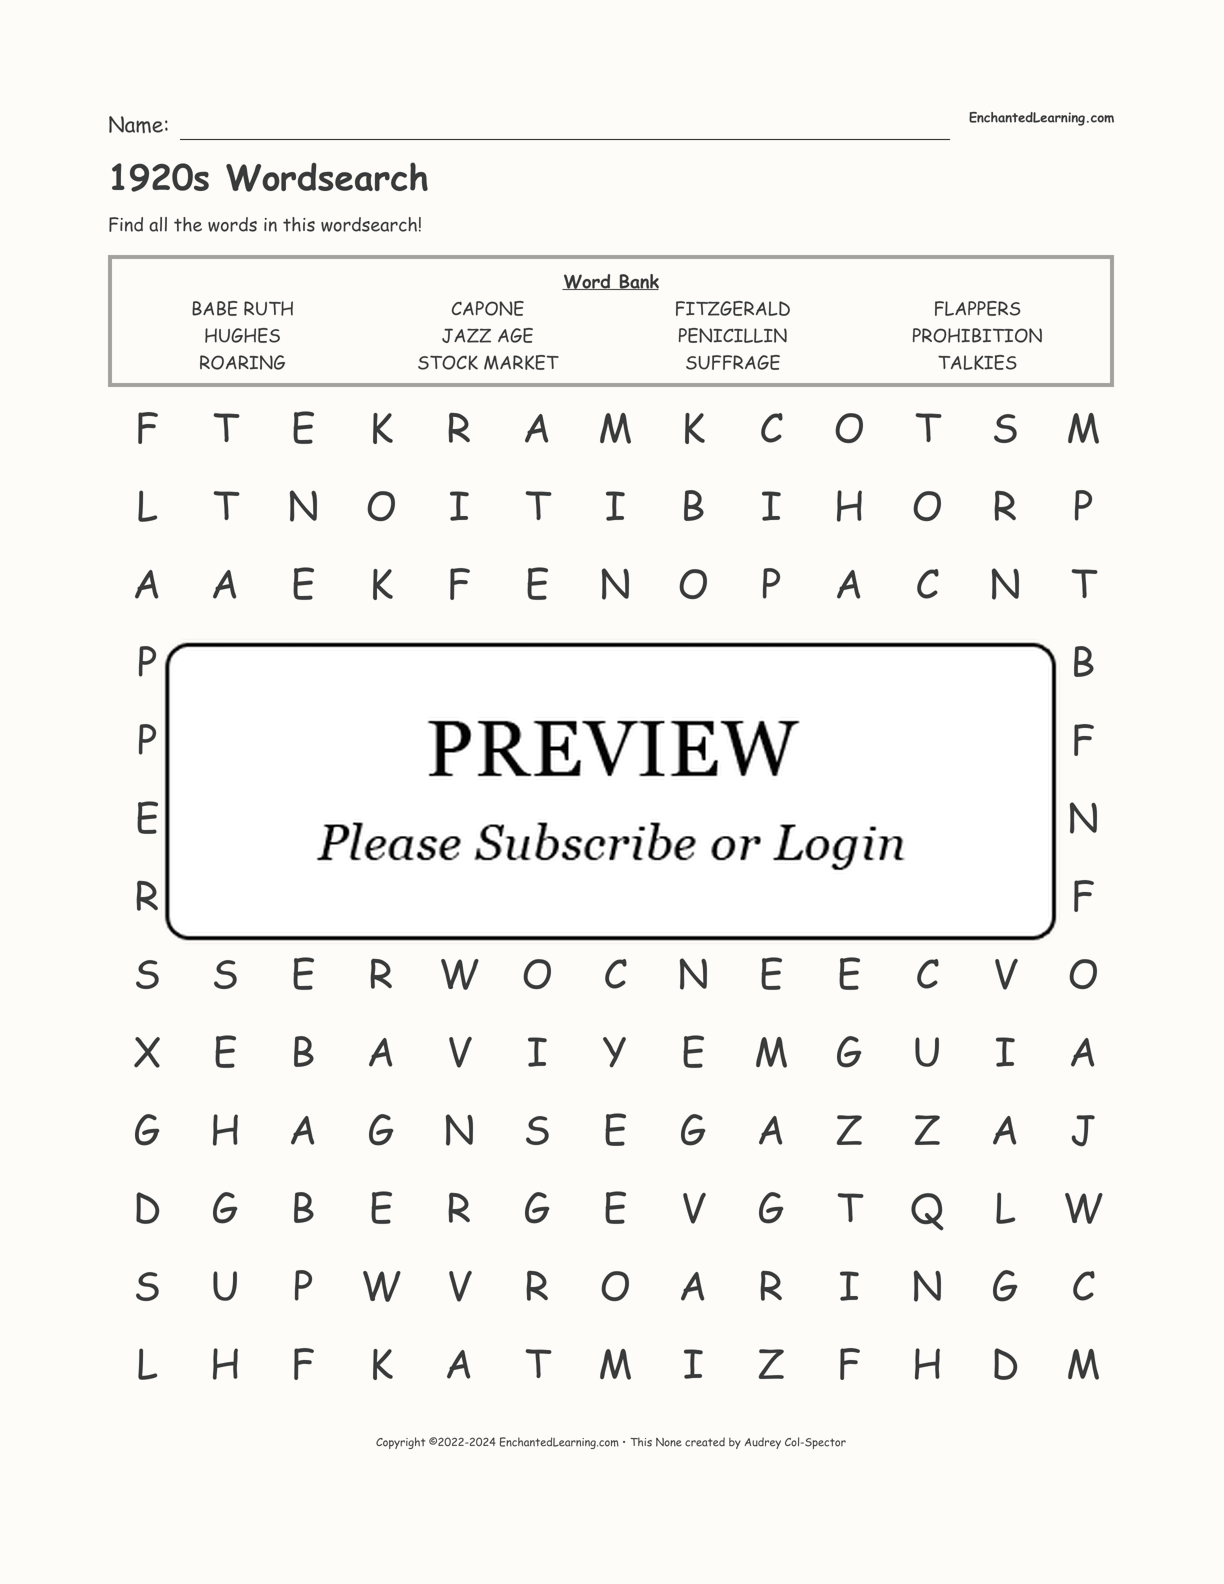 1920s Wordsearch interactive worksheet page 1